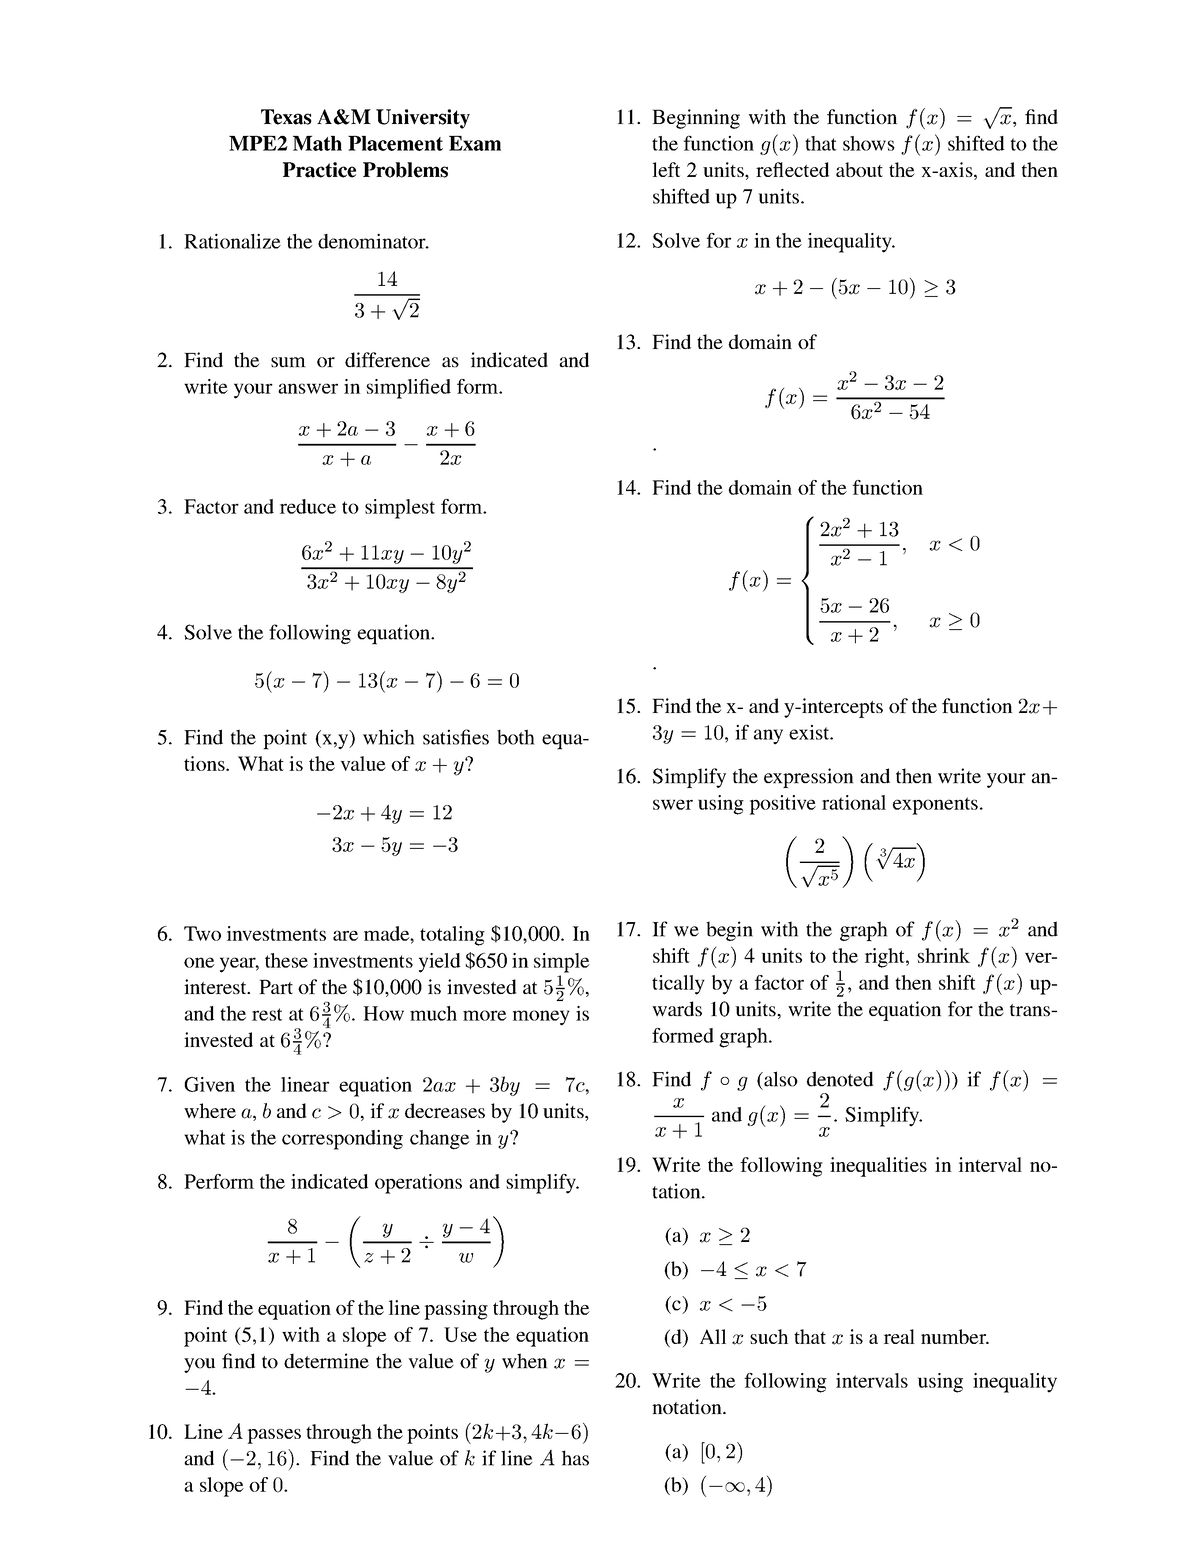 MPE2 - yes - Texas A&M University MPE2 Math Placement Exam Practice ...